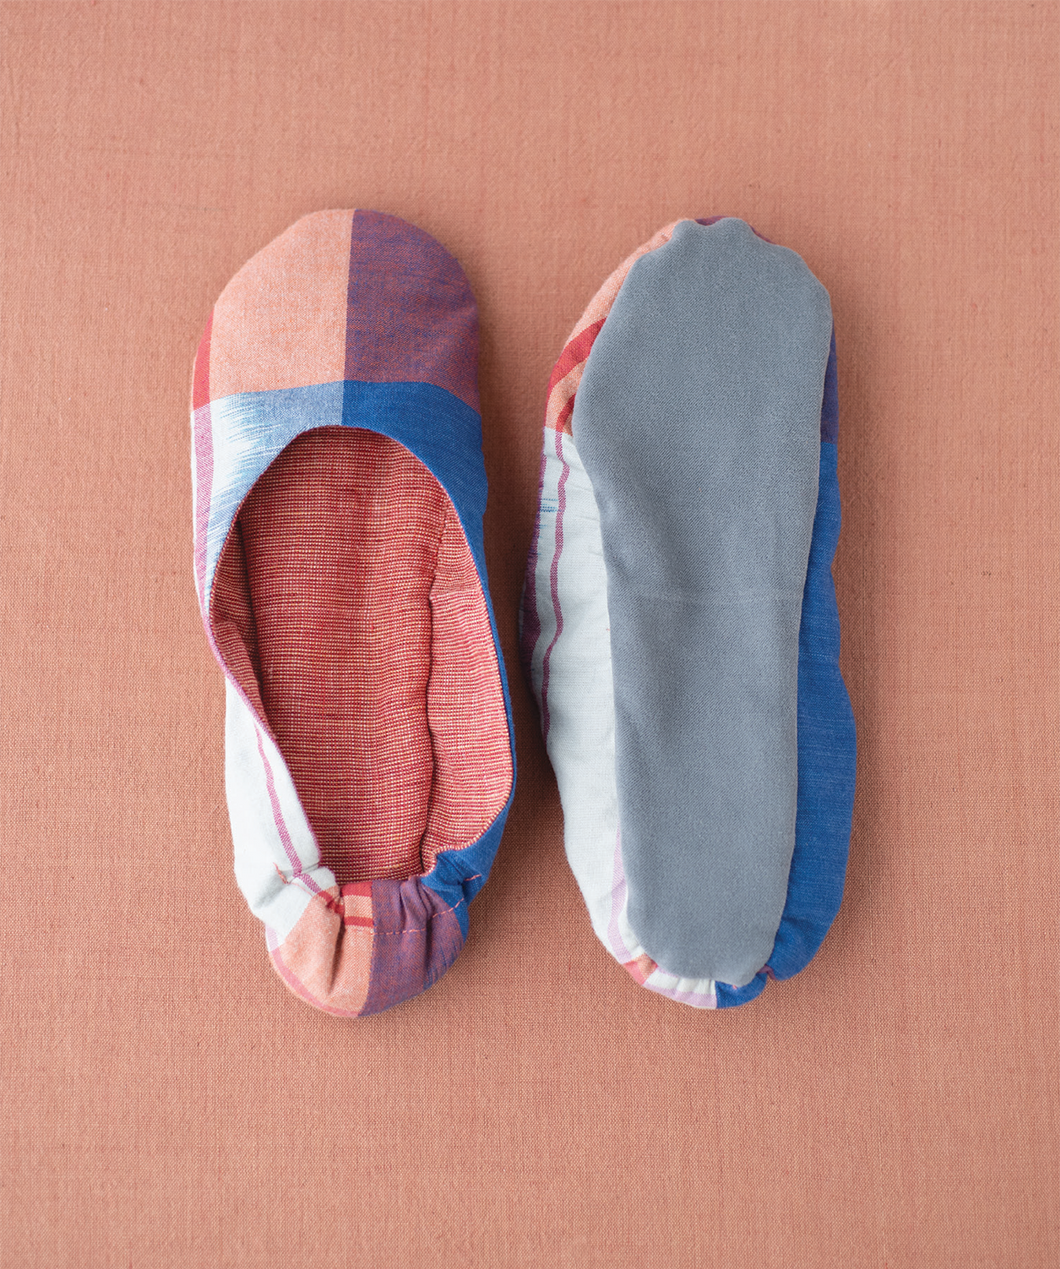 House Slippers - PDF Tutorial